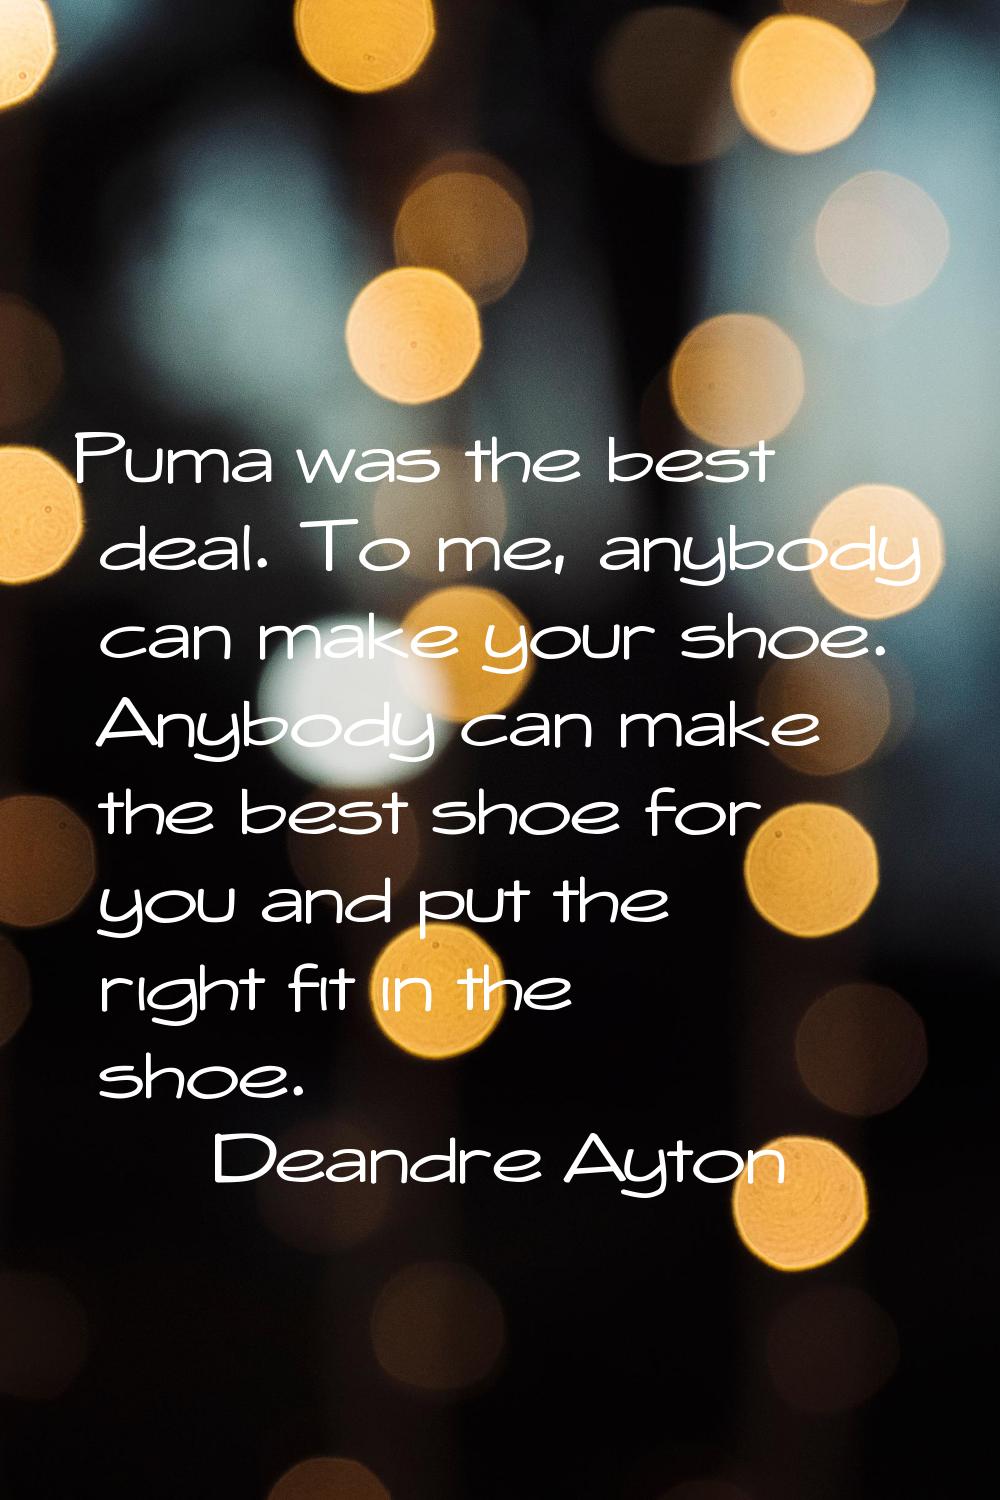 Puma was the best deal. To me, anybody can make your shoe. Anybody can make the best shoe for you a